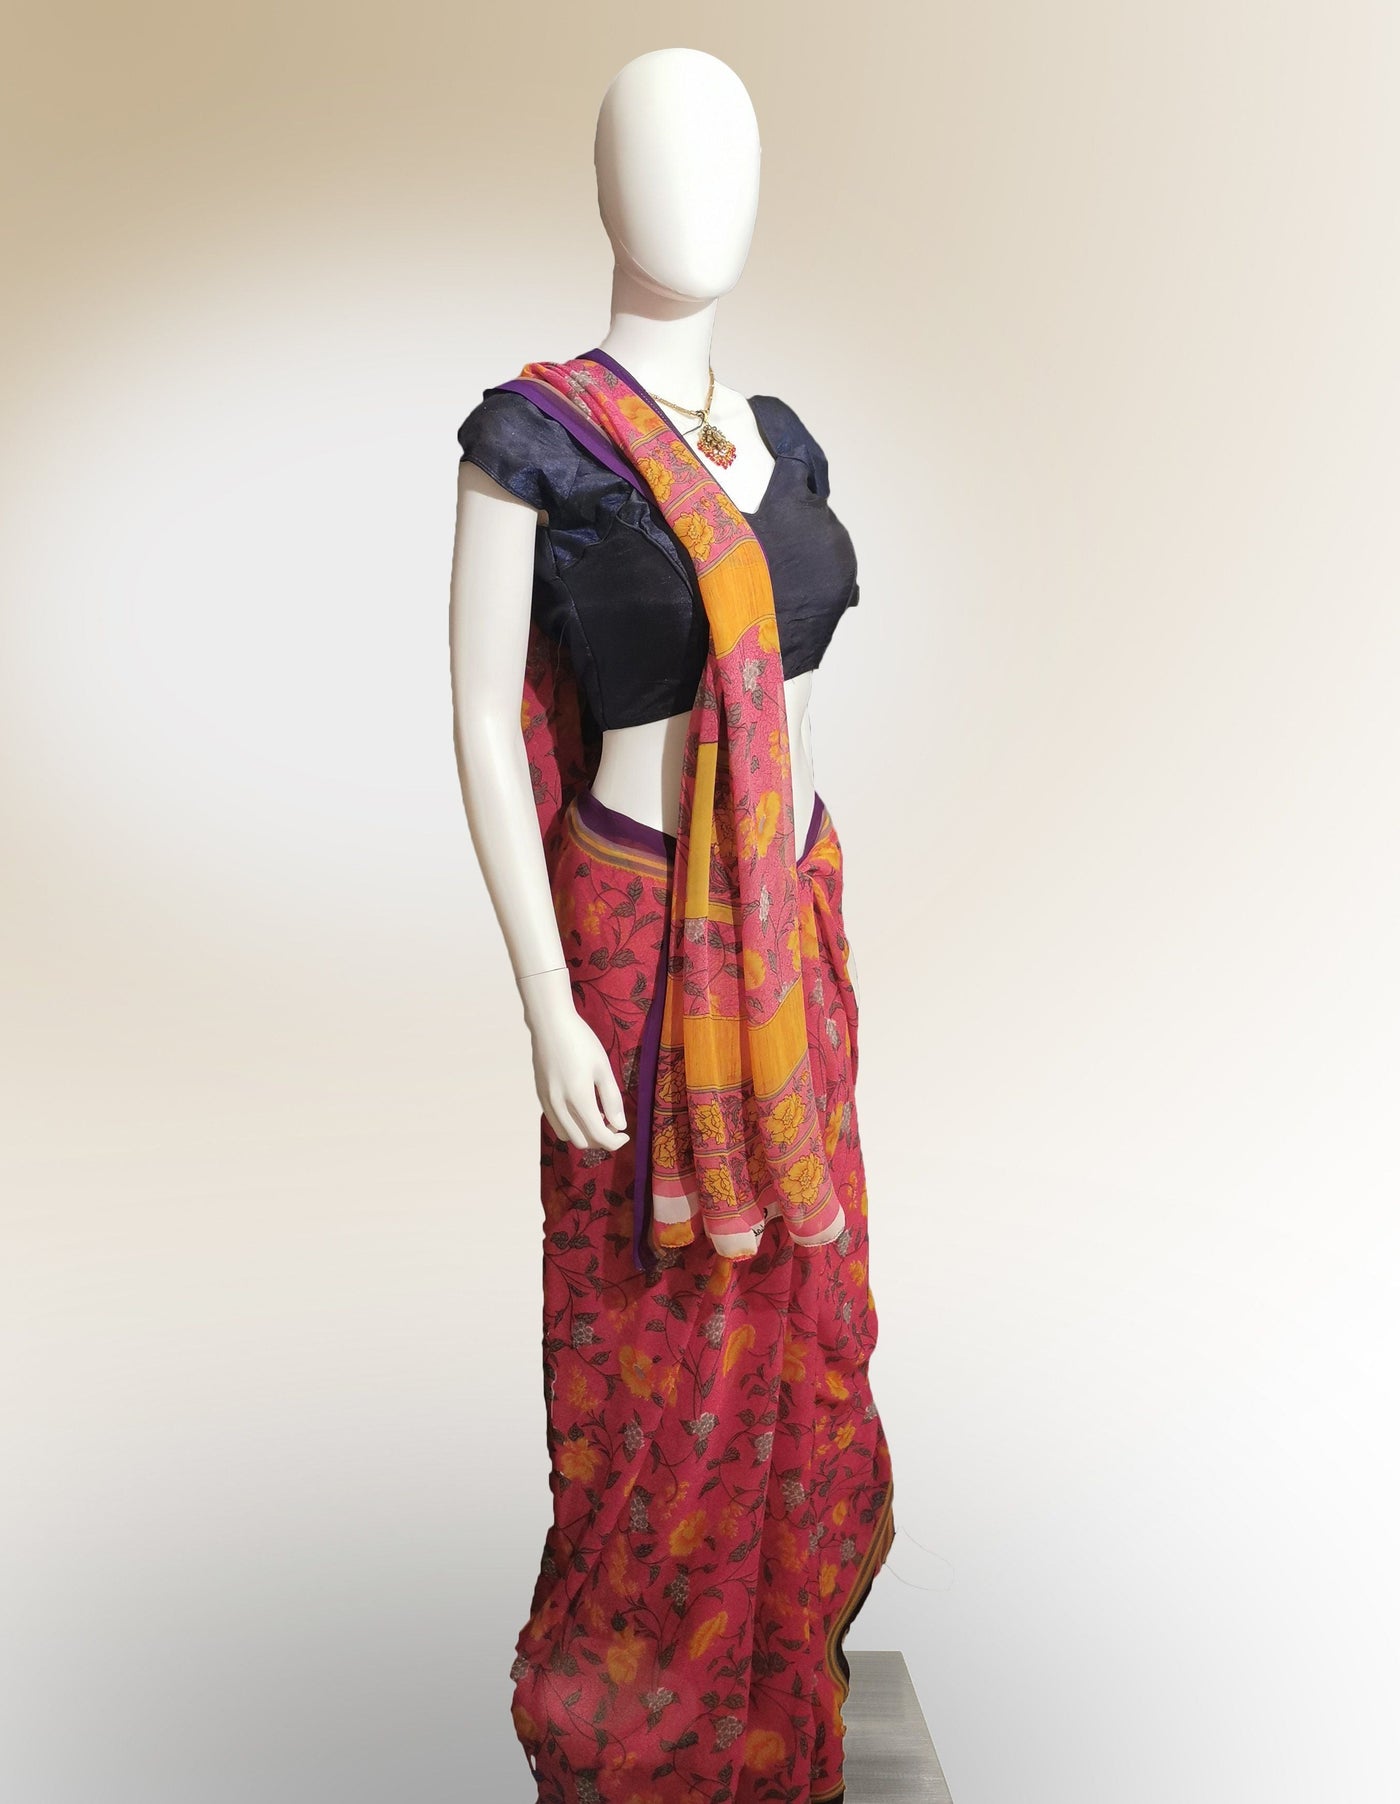 Saree in Mango and Pink Floral Motif - Indian Clothing in Denver, CO, Aurora, CO, Boulder, CO, Fort Collins, CO, Colorado Springs, CO, Parker, CO, Highlands Ranch, CO, Cherry Creek, CO, Centennial, CO, and Longmont, CO. Nationwide shipping USA - India Fashion X